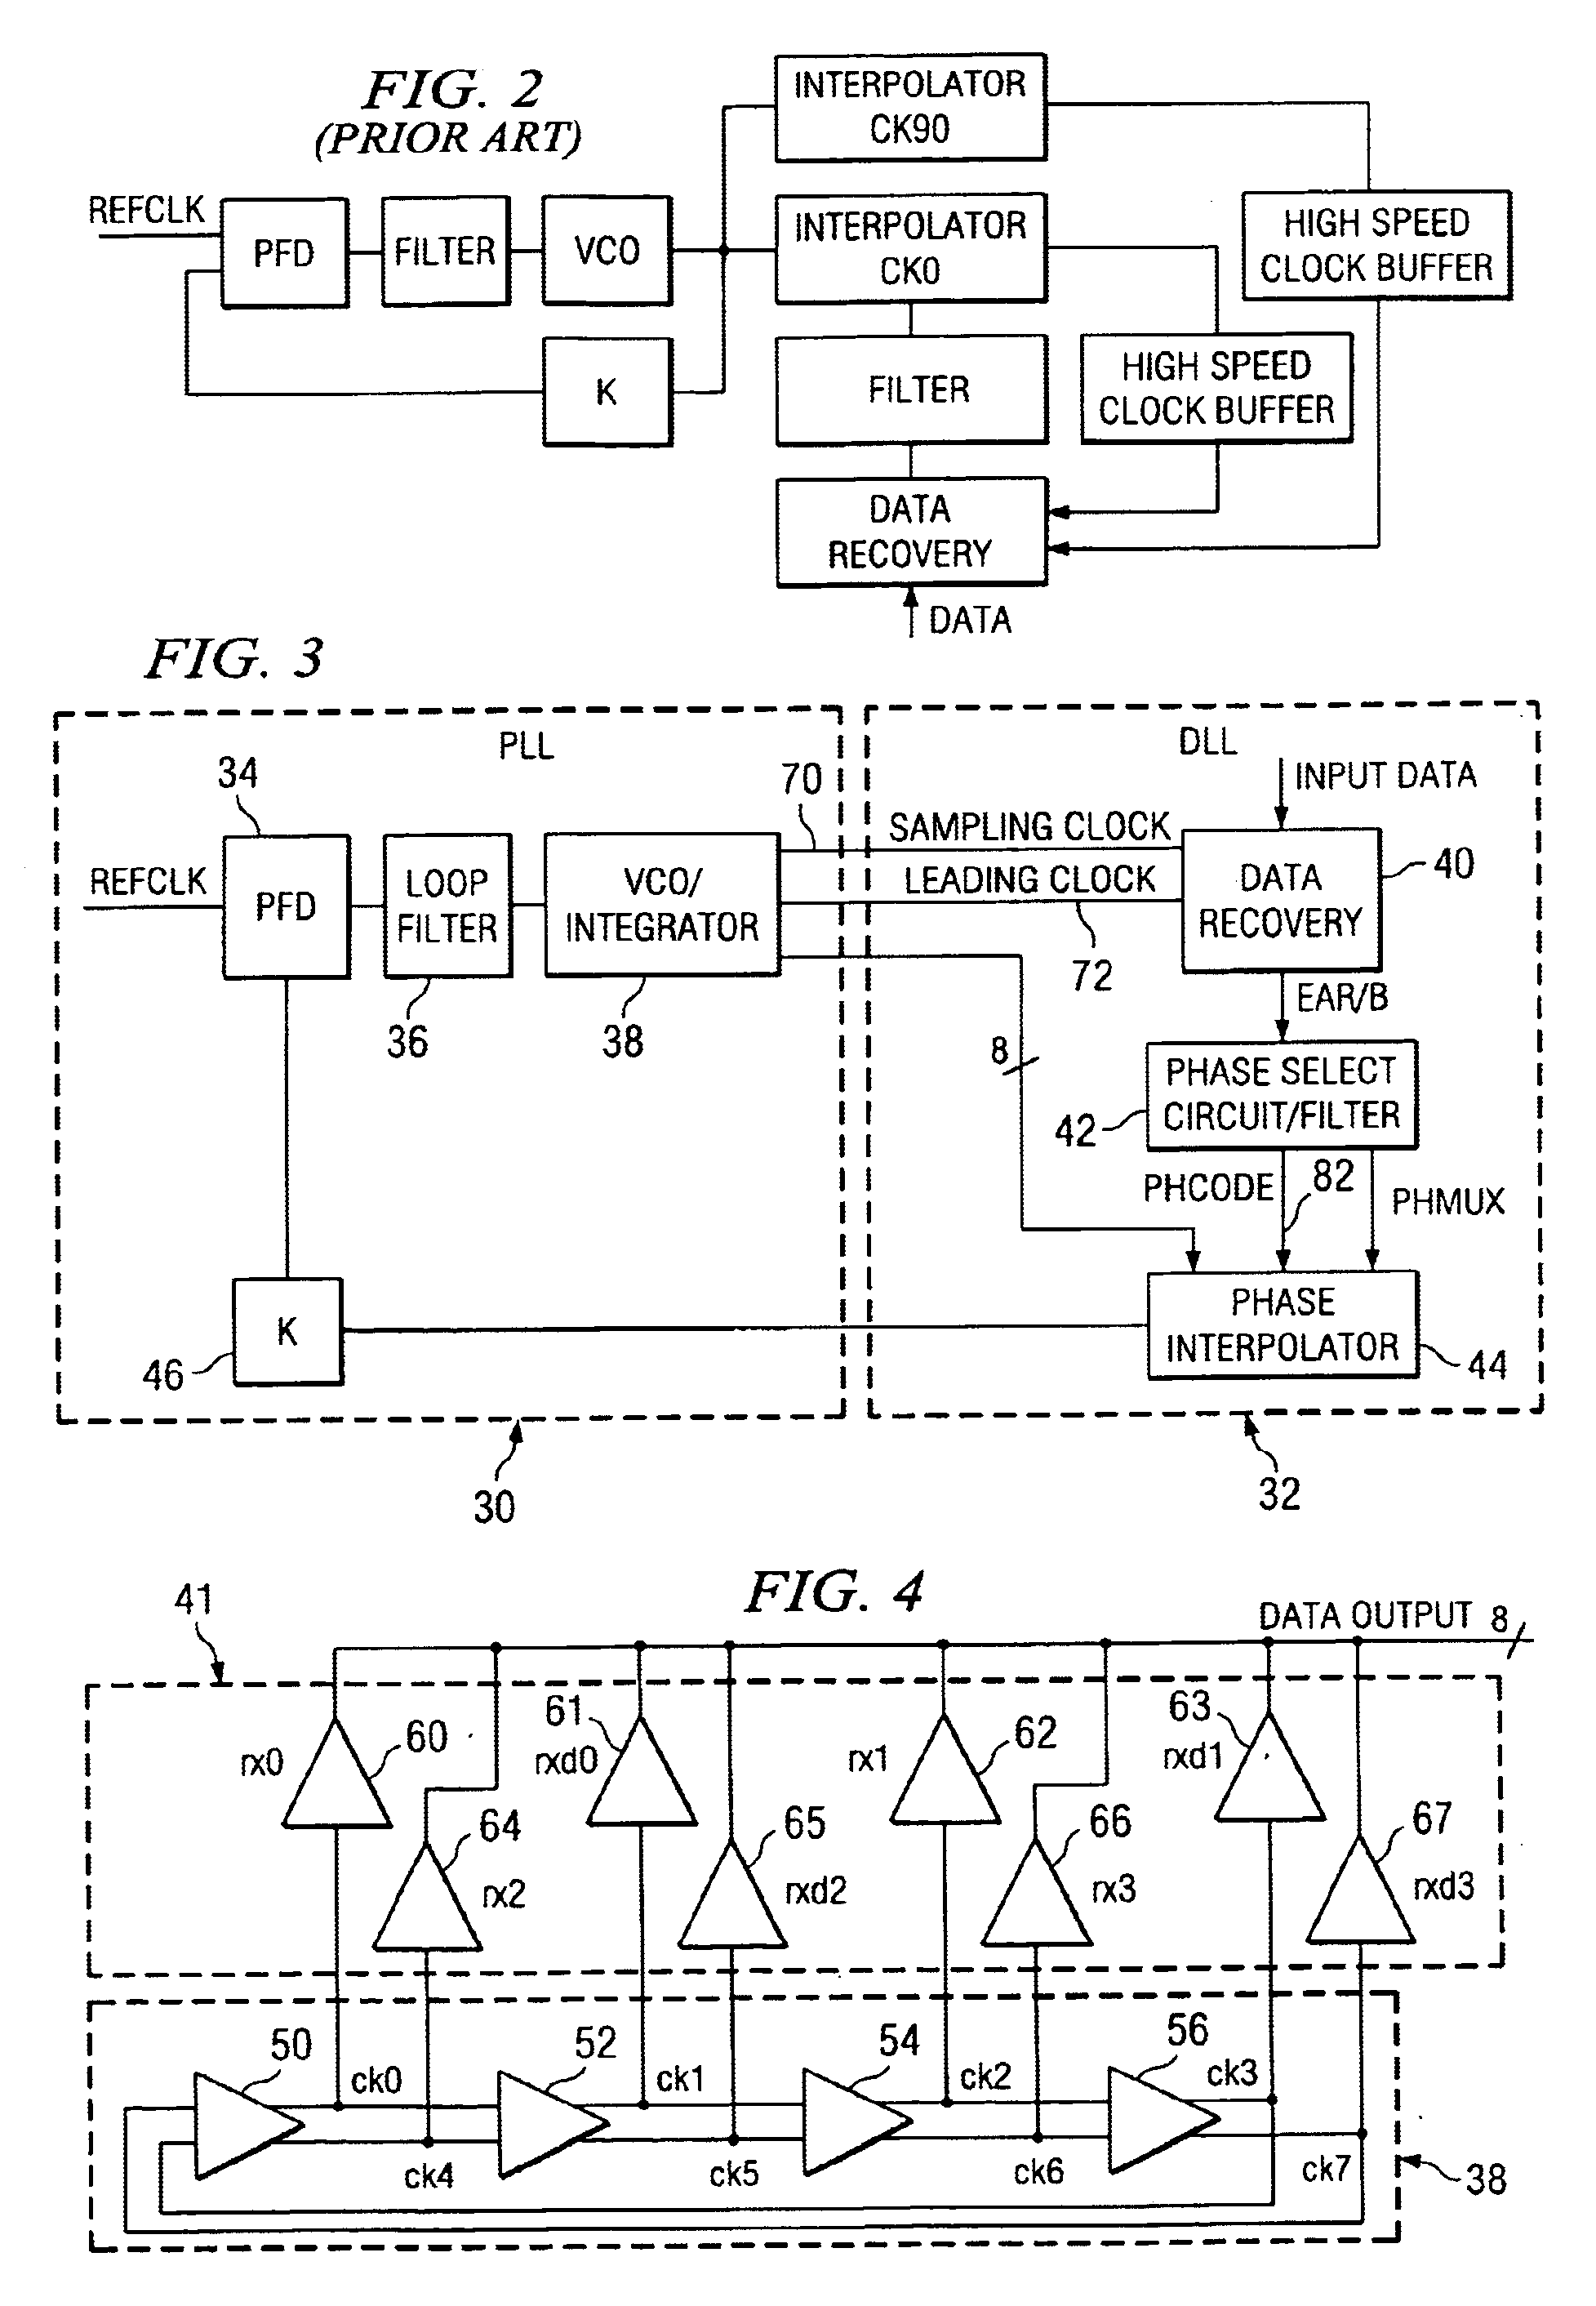 Time division multiplex data recovery system using close loop phase and delay locked loop